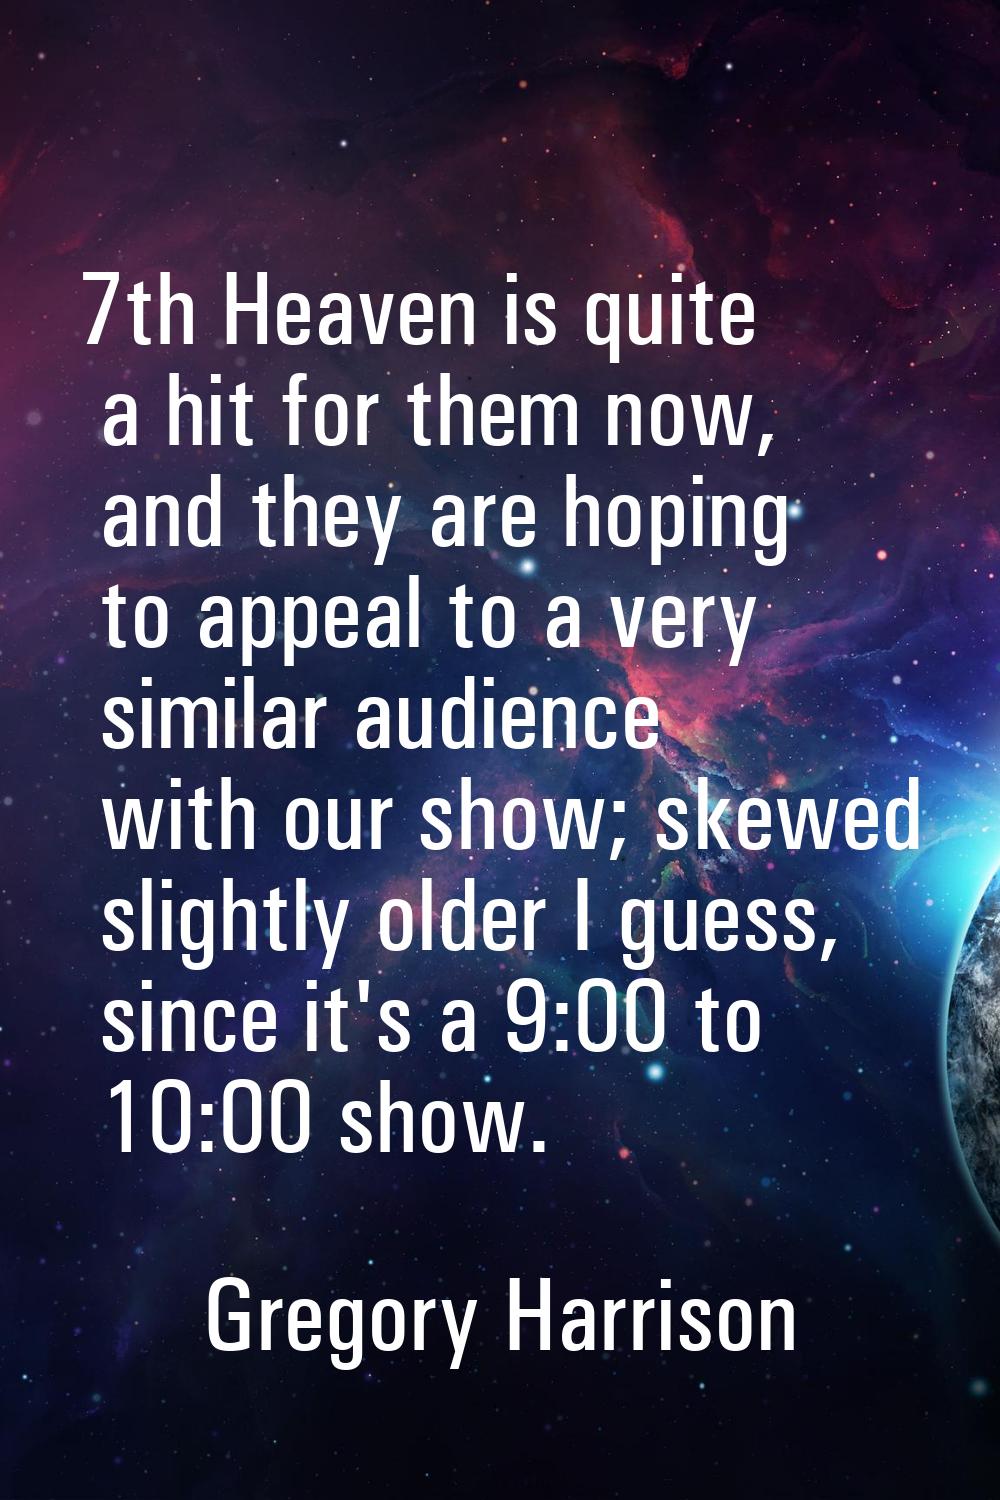 7th Heaven is quite a hit for them now, and they are hoping to appeal to a very similar audience wi